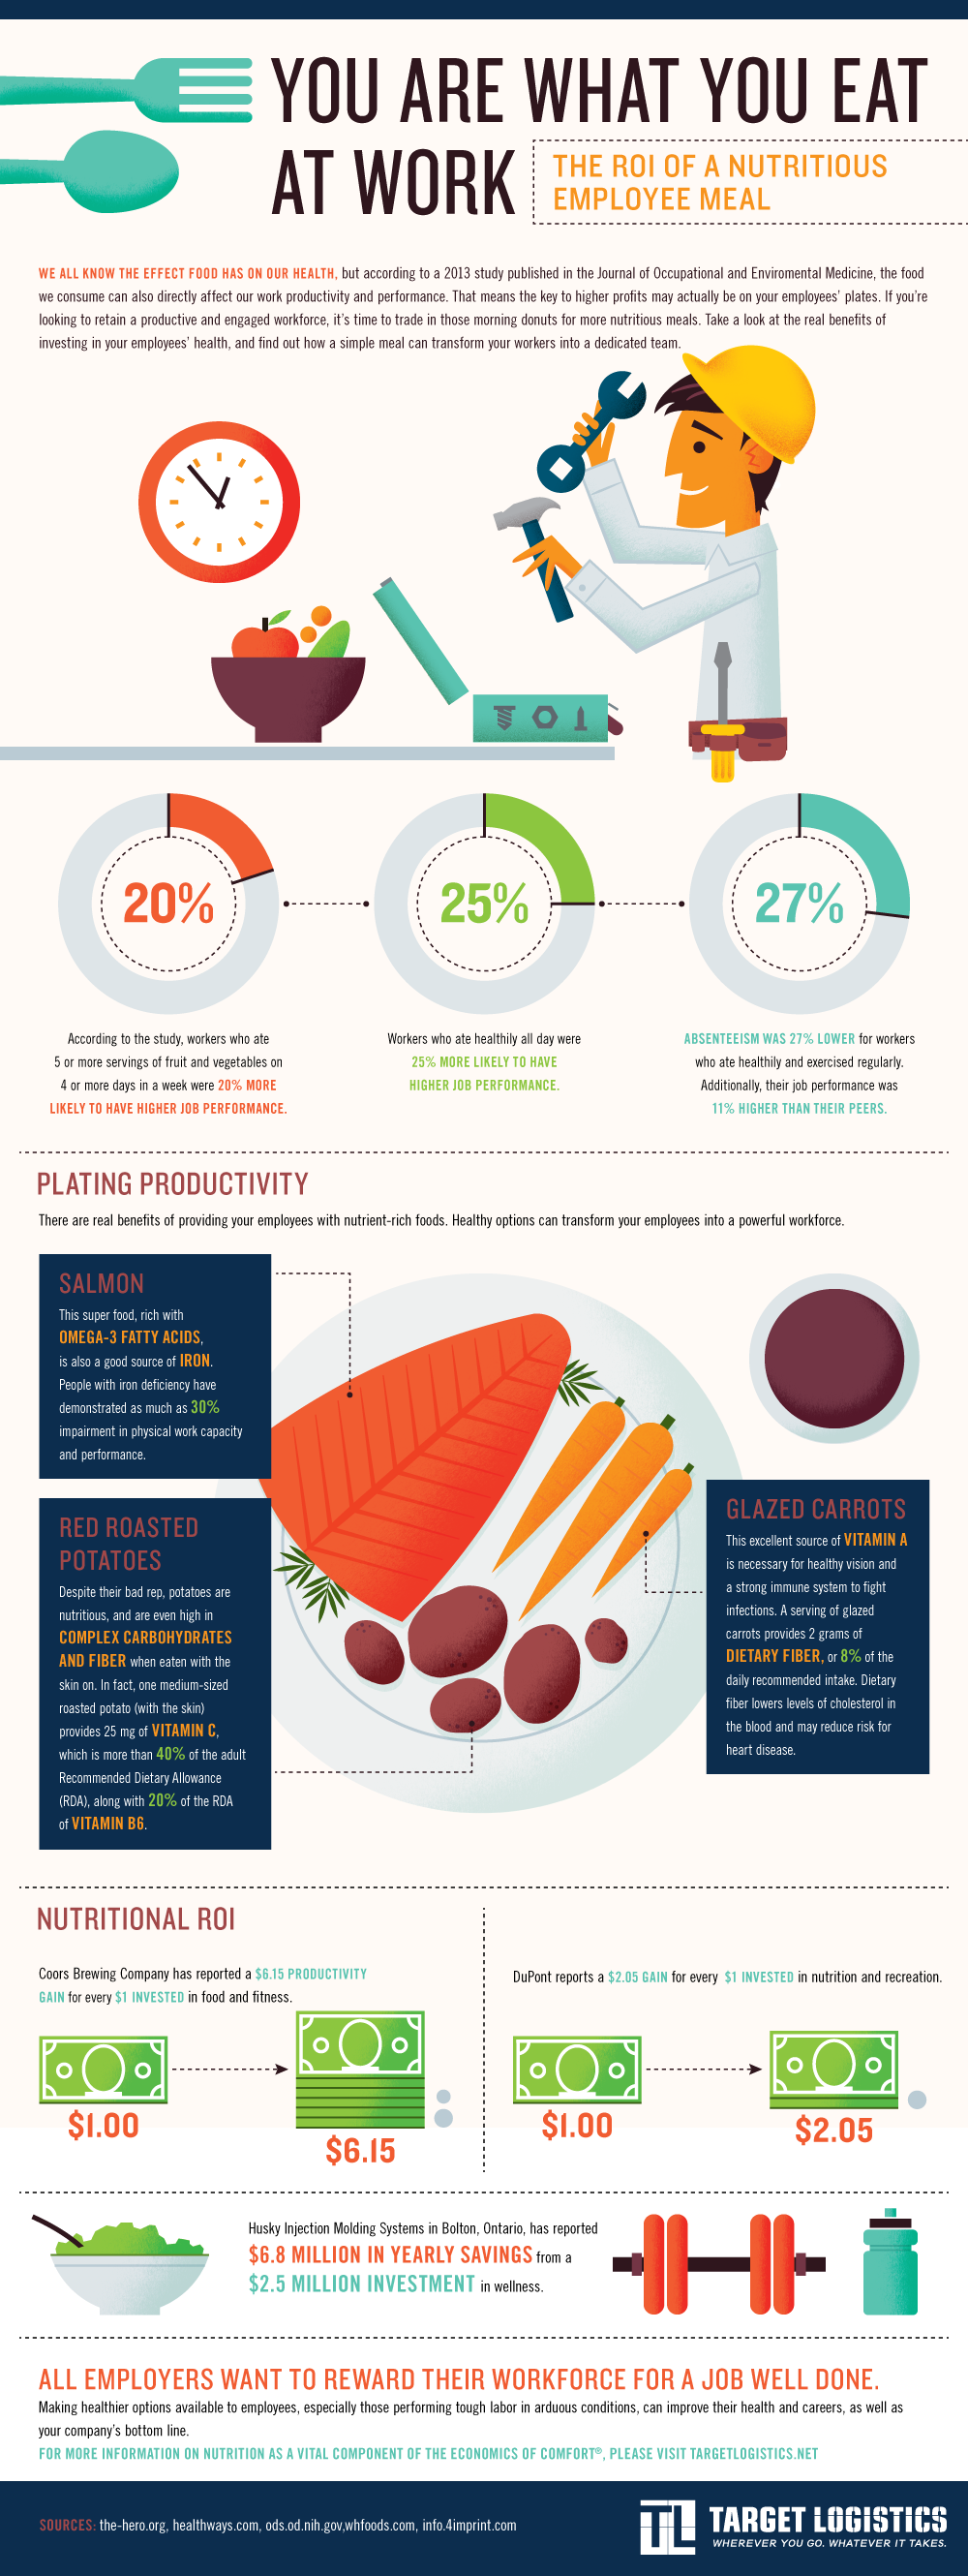 You Are What You Eat at Work [Infographic]